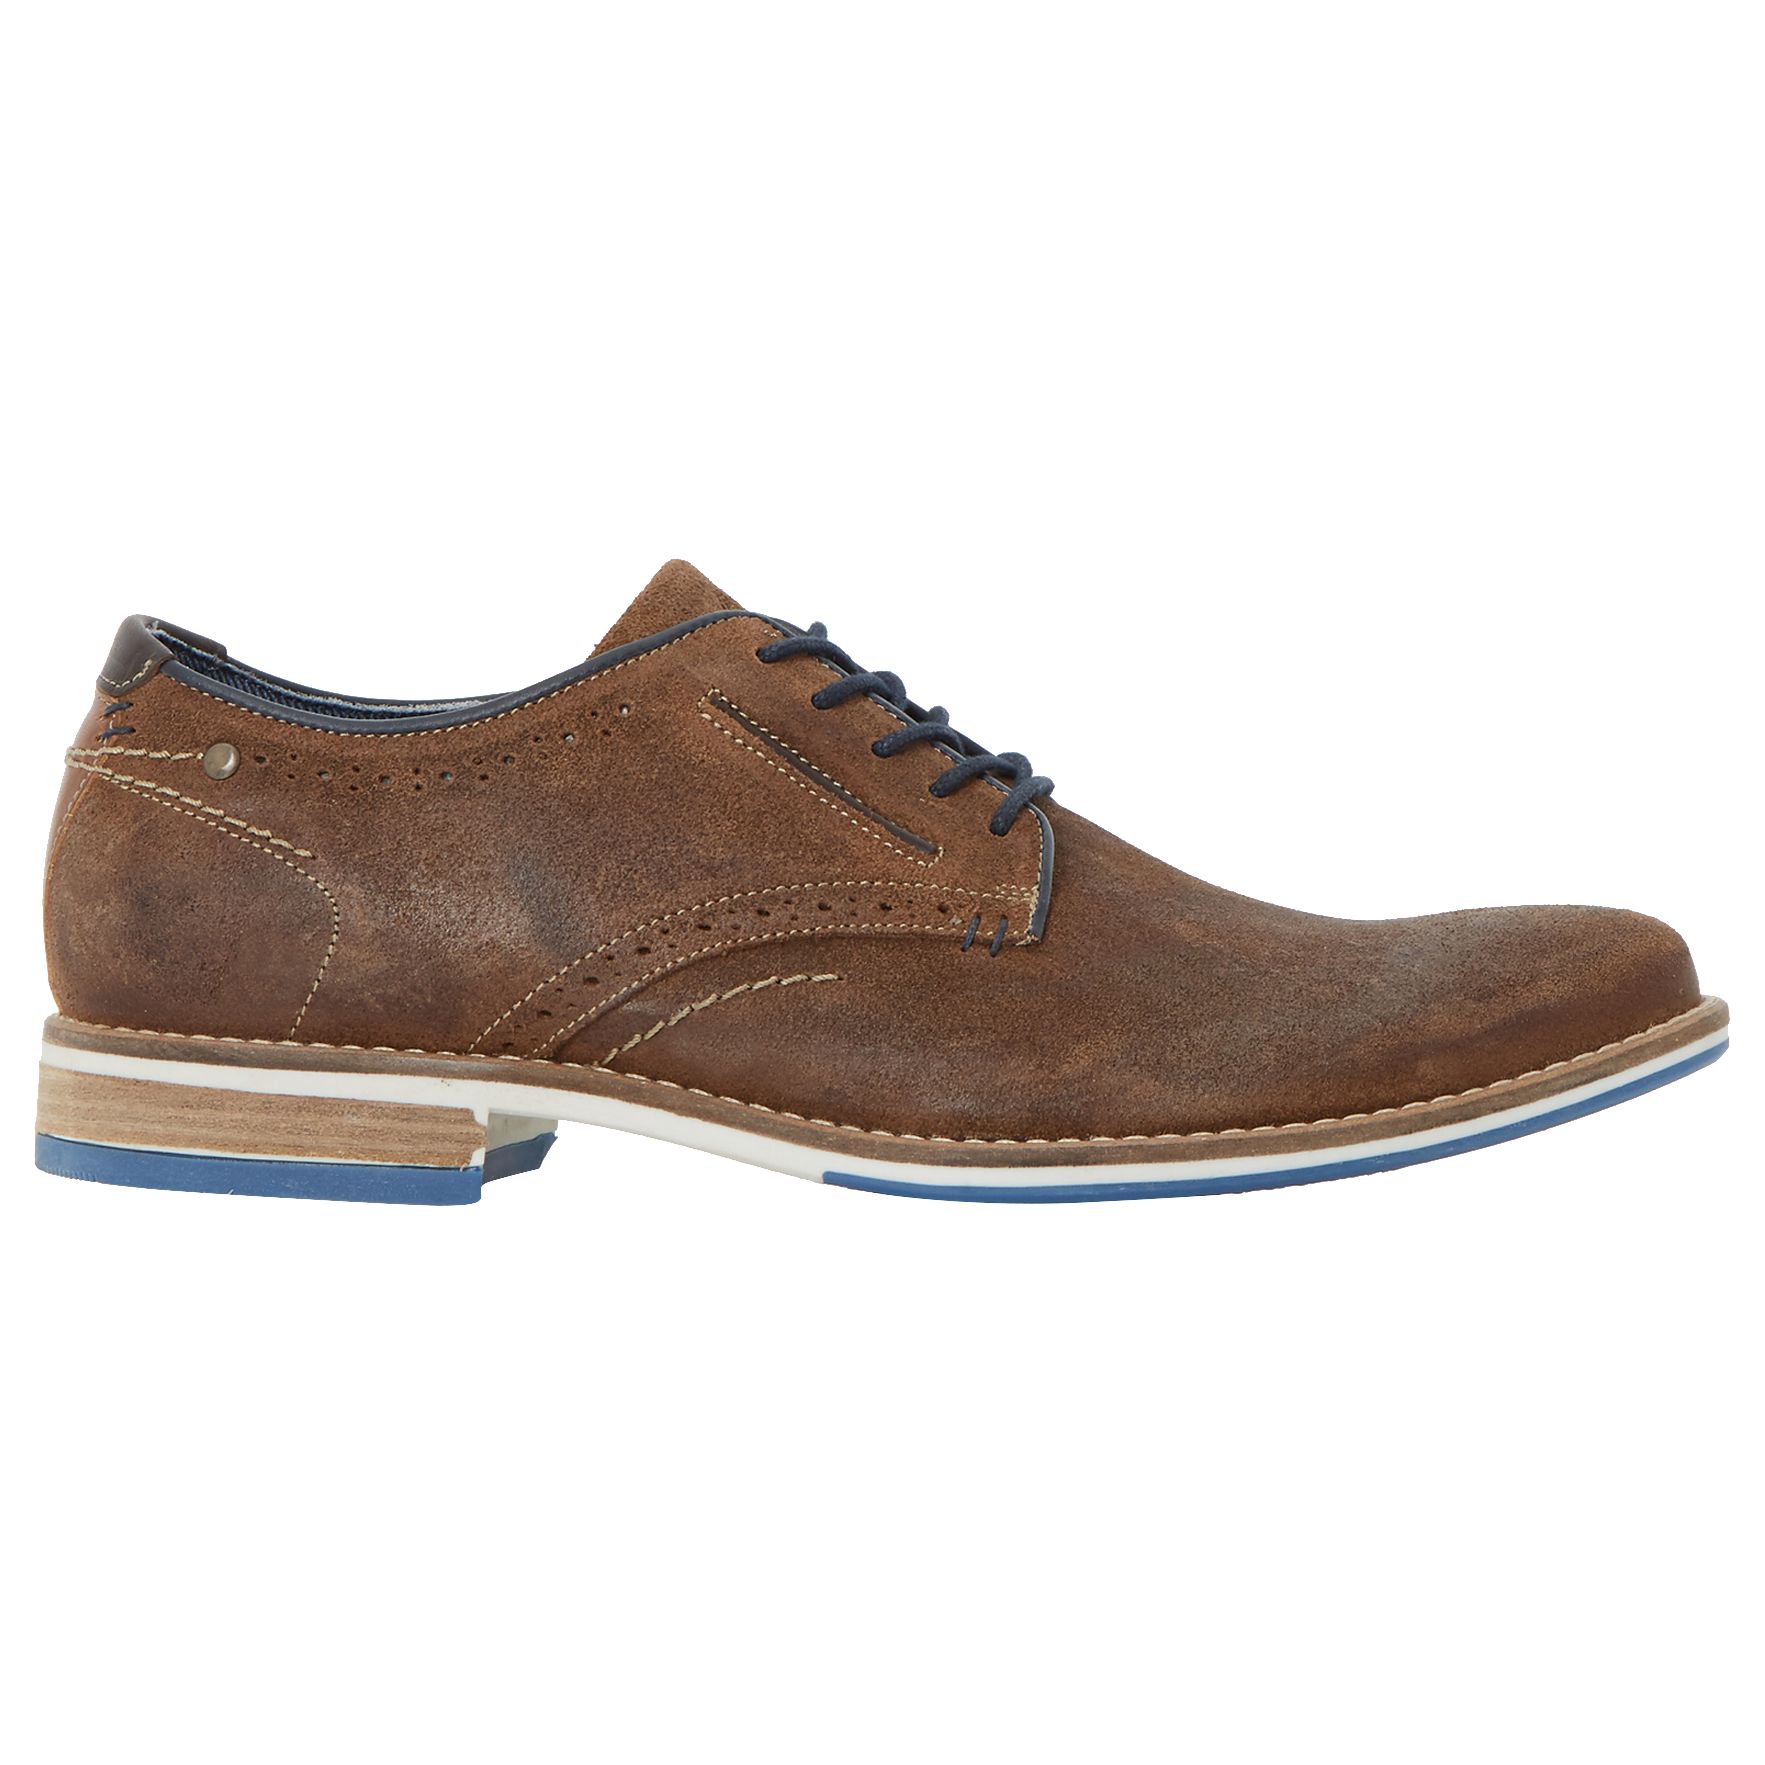 Dune Brewer Gibson Suede Shoes, Tan Suede, 9